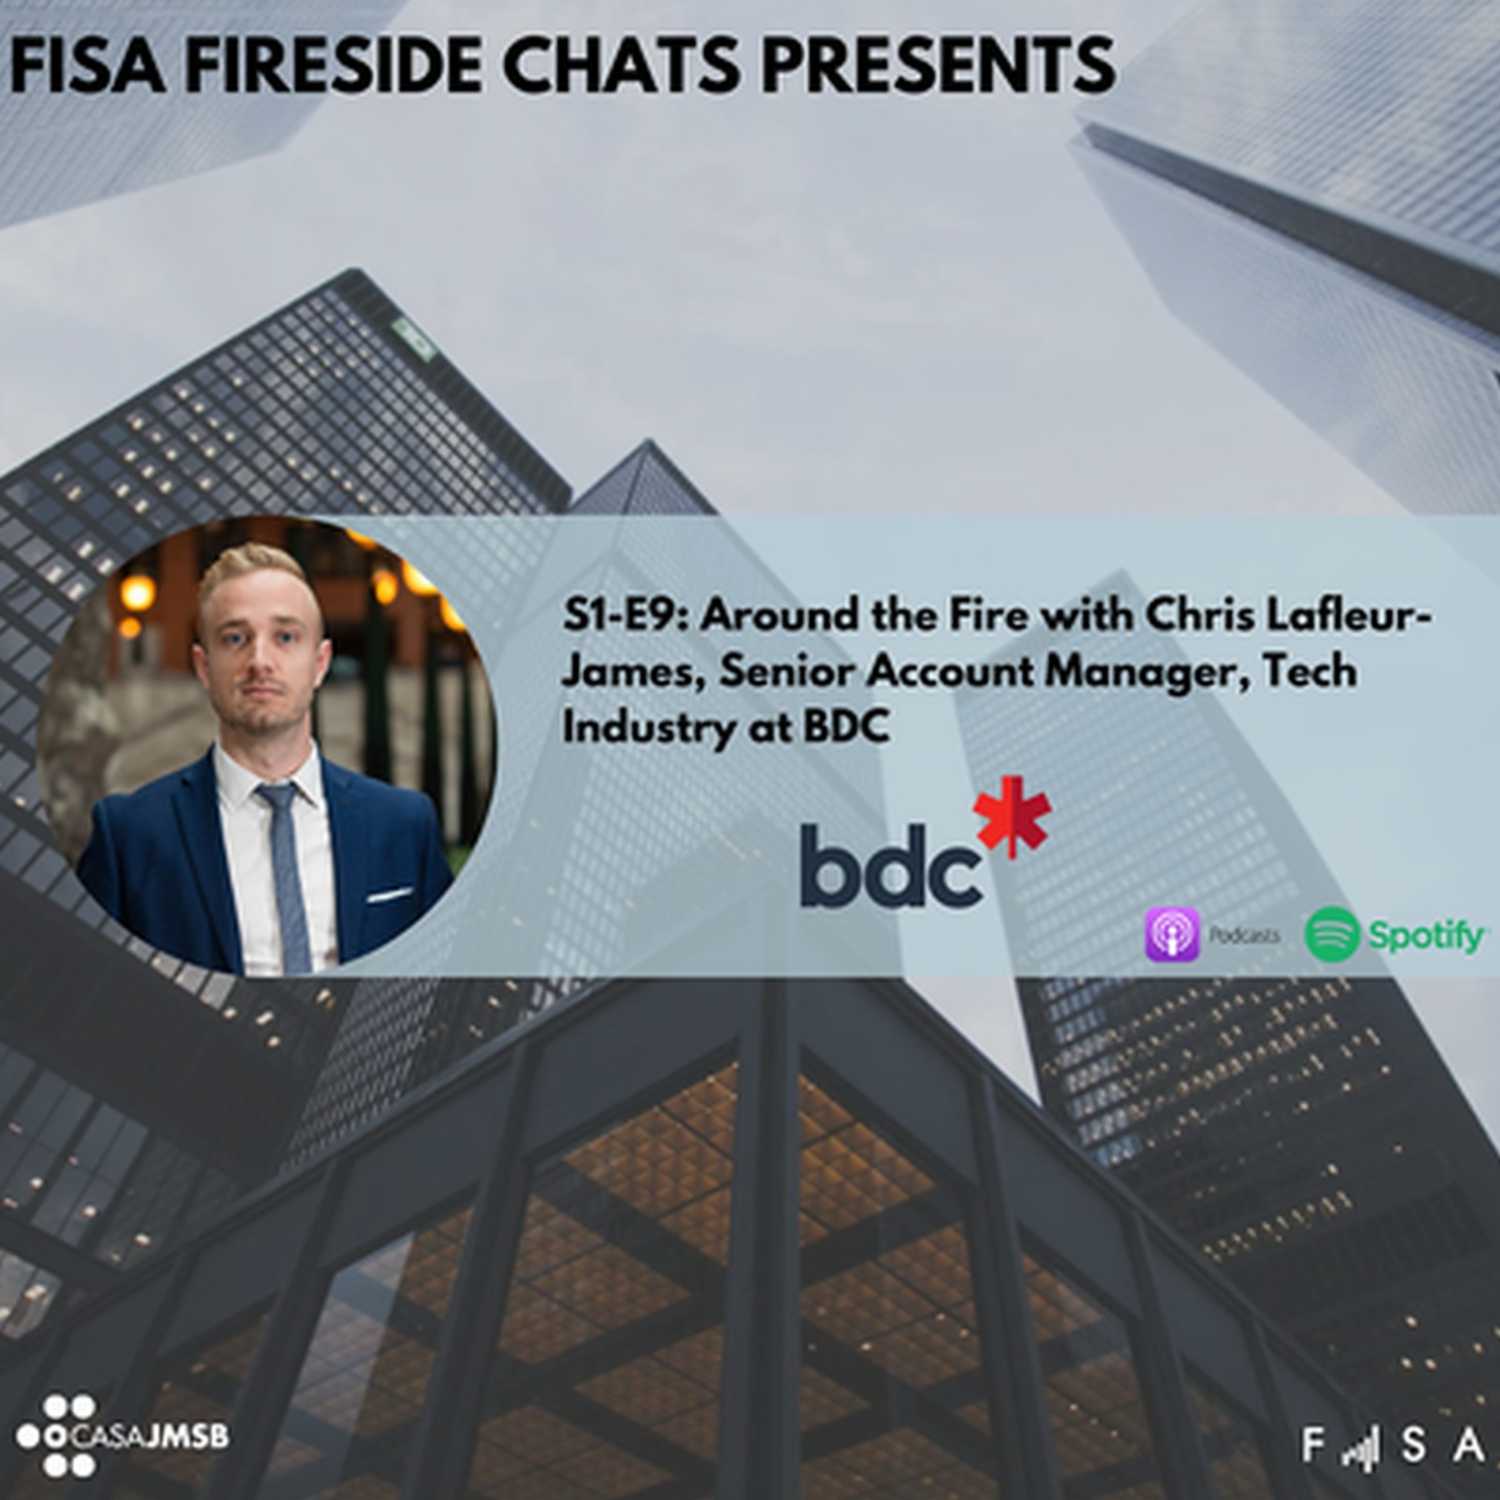 Around the Fire with Chris Lafleur-James, Senior Account Manager, Tech Industry at BDC